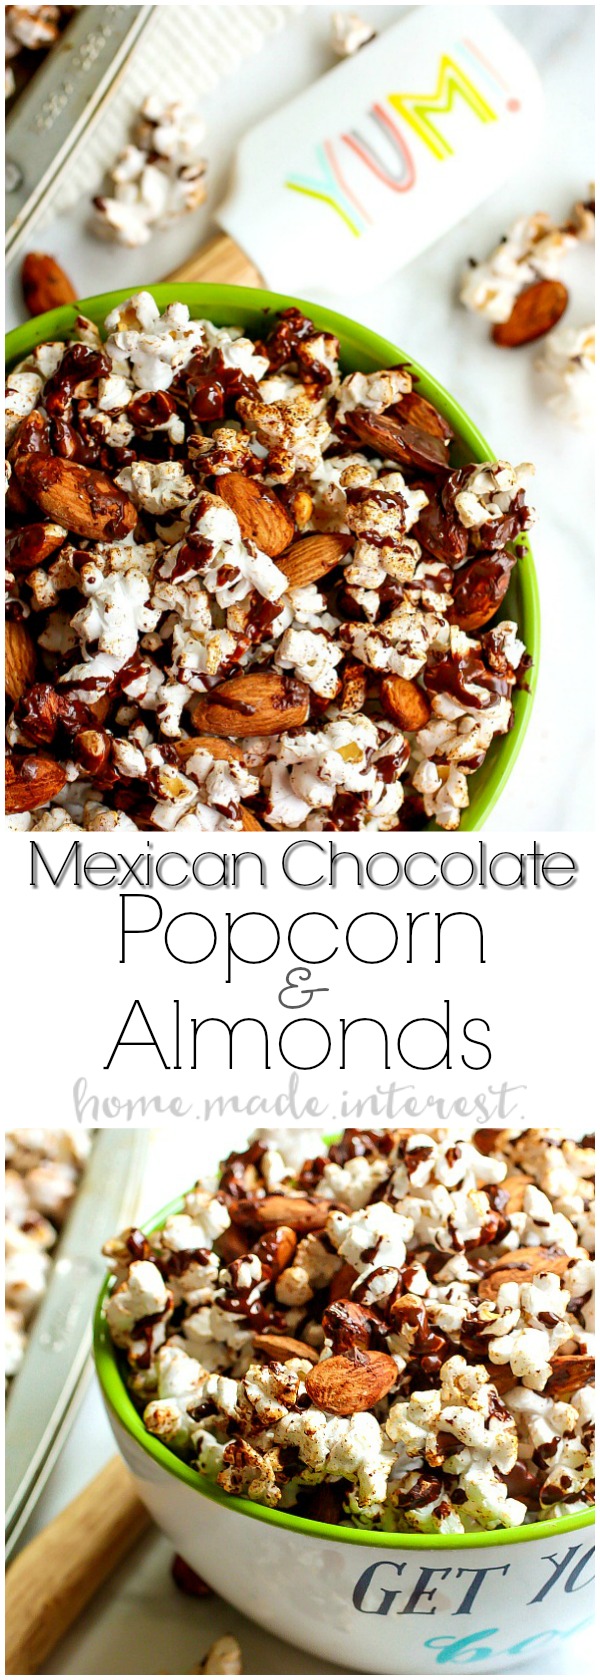 Mexican Chocolate Popcorn and Almonds | This sweet and crunchy Mexican Chocolate Popcorn and Almonds is a healthy snack that is easy to make. A blend of spices and chocolate gives this Mexican Chocolate Popcorn and Almonds a sweet flavor with a little bit of a kick and the light popcorn and almonds are healthy snack foods that taste great! 